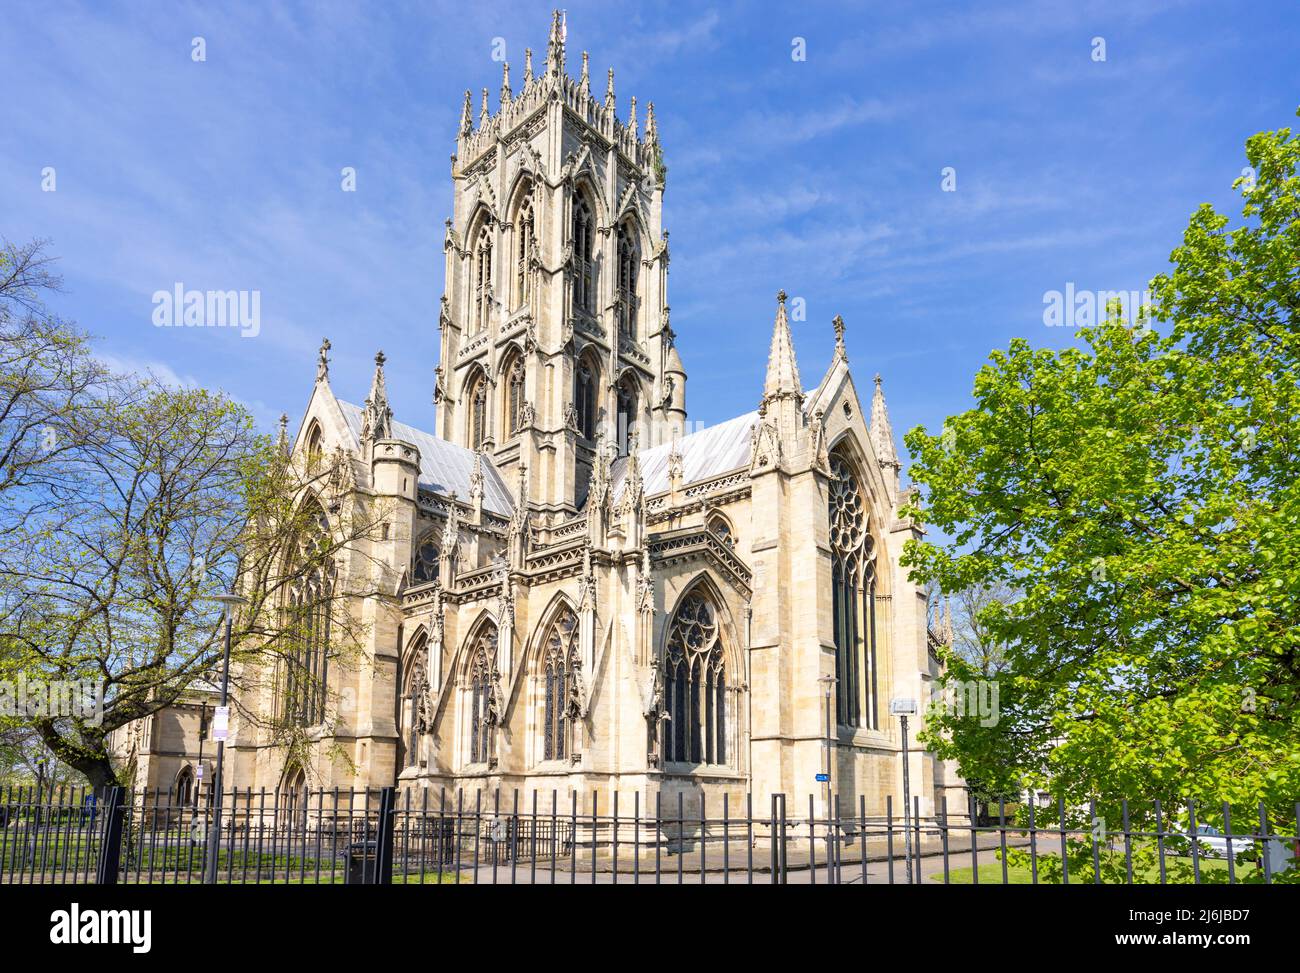 The Minster Church of St George ou Doncaster Minster Doncaster South Yorkshire Angleterre gb Europe Banque D'Images